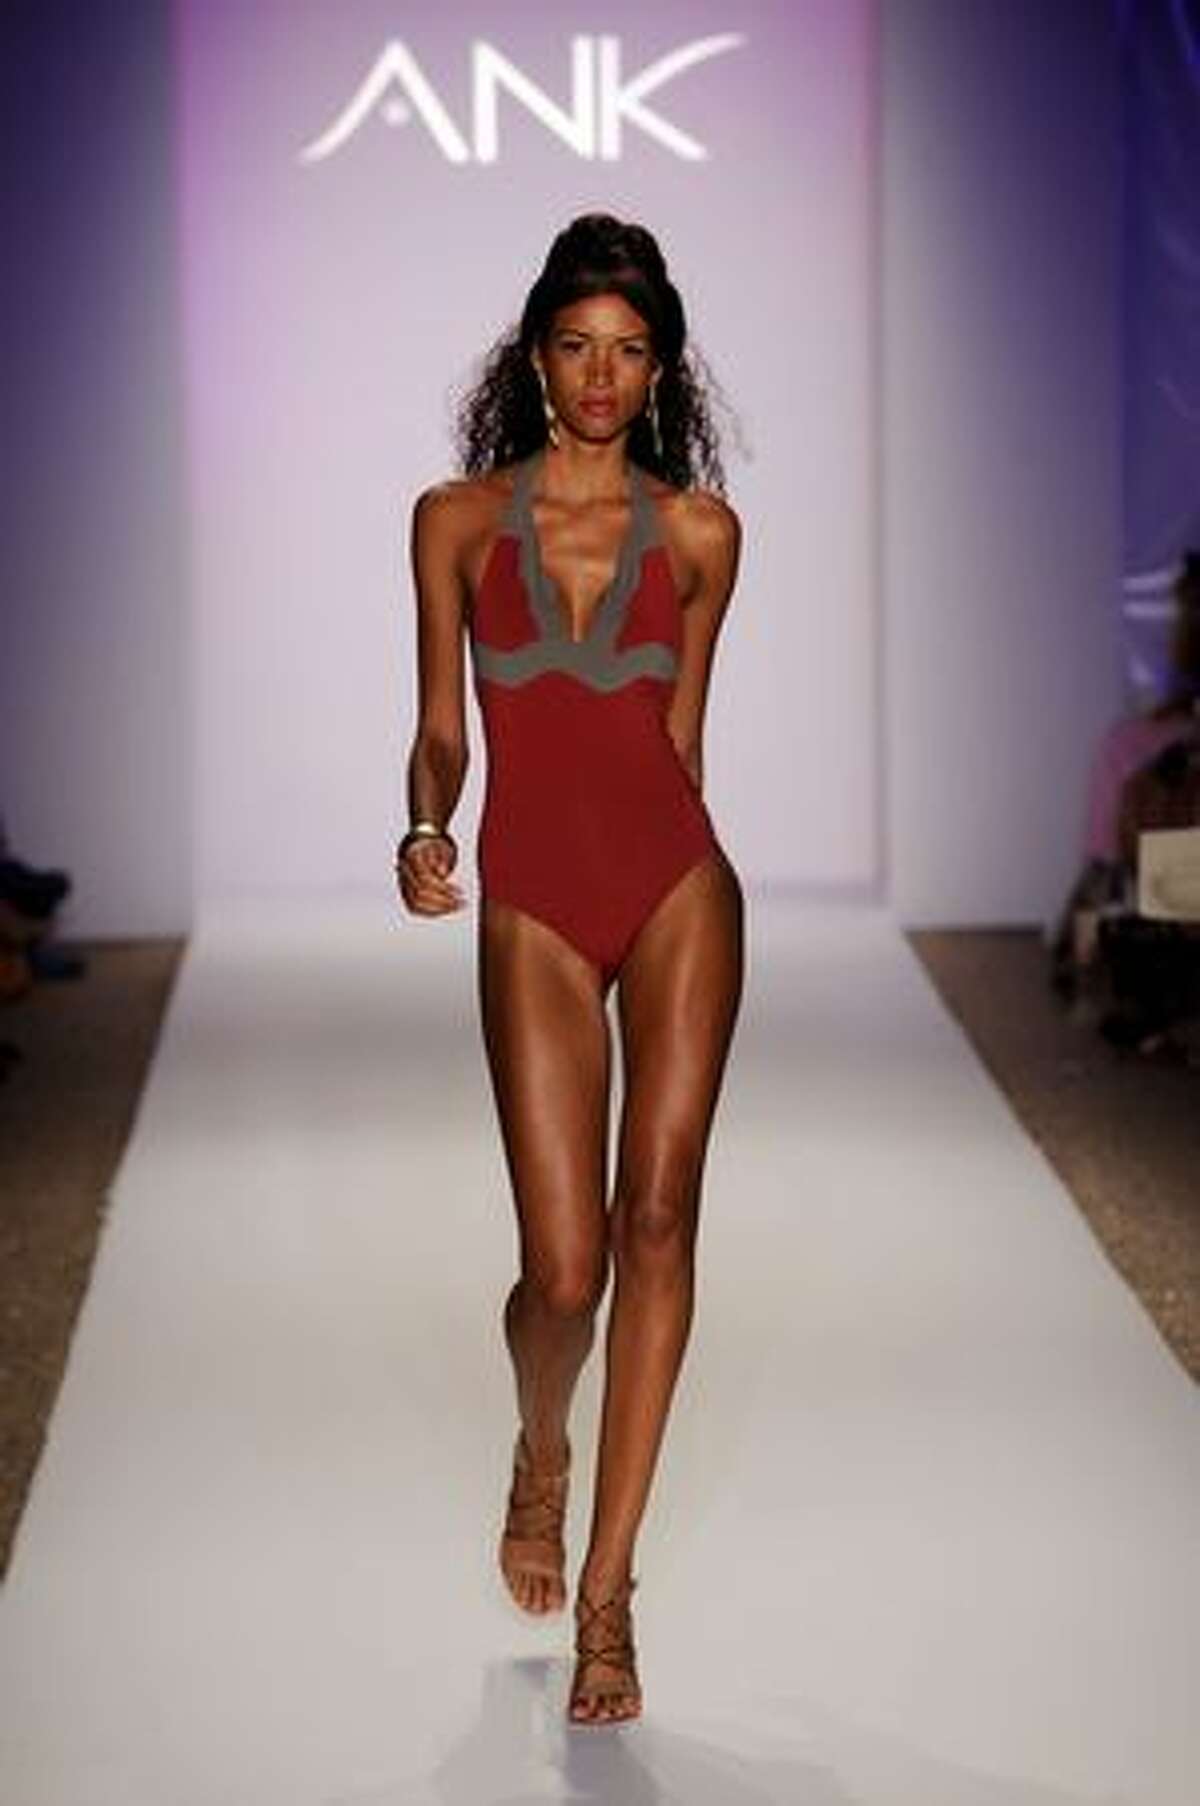 MIAMI BEACH, FL - JULY 17: A model walks the runway at the ANK by Mirla Sabino 2010 fashion show during Mercedes-Benz Fashion Week Swim at the Beachway at The Raleigh on July 17, 2009 in Miami Beach, Florida.